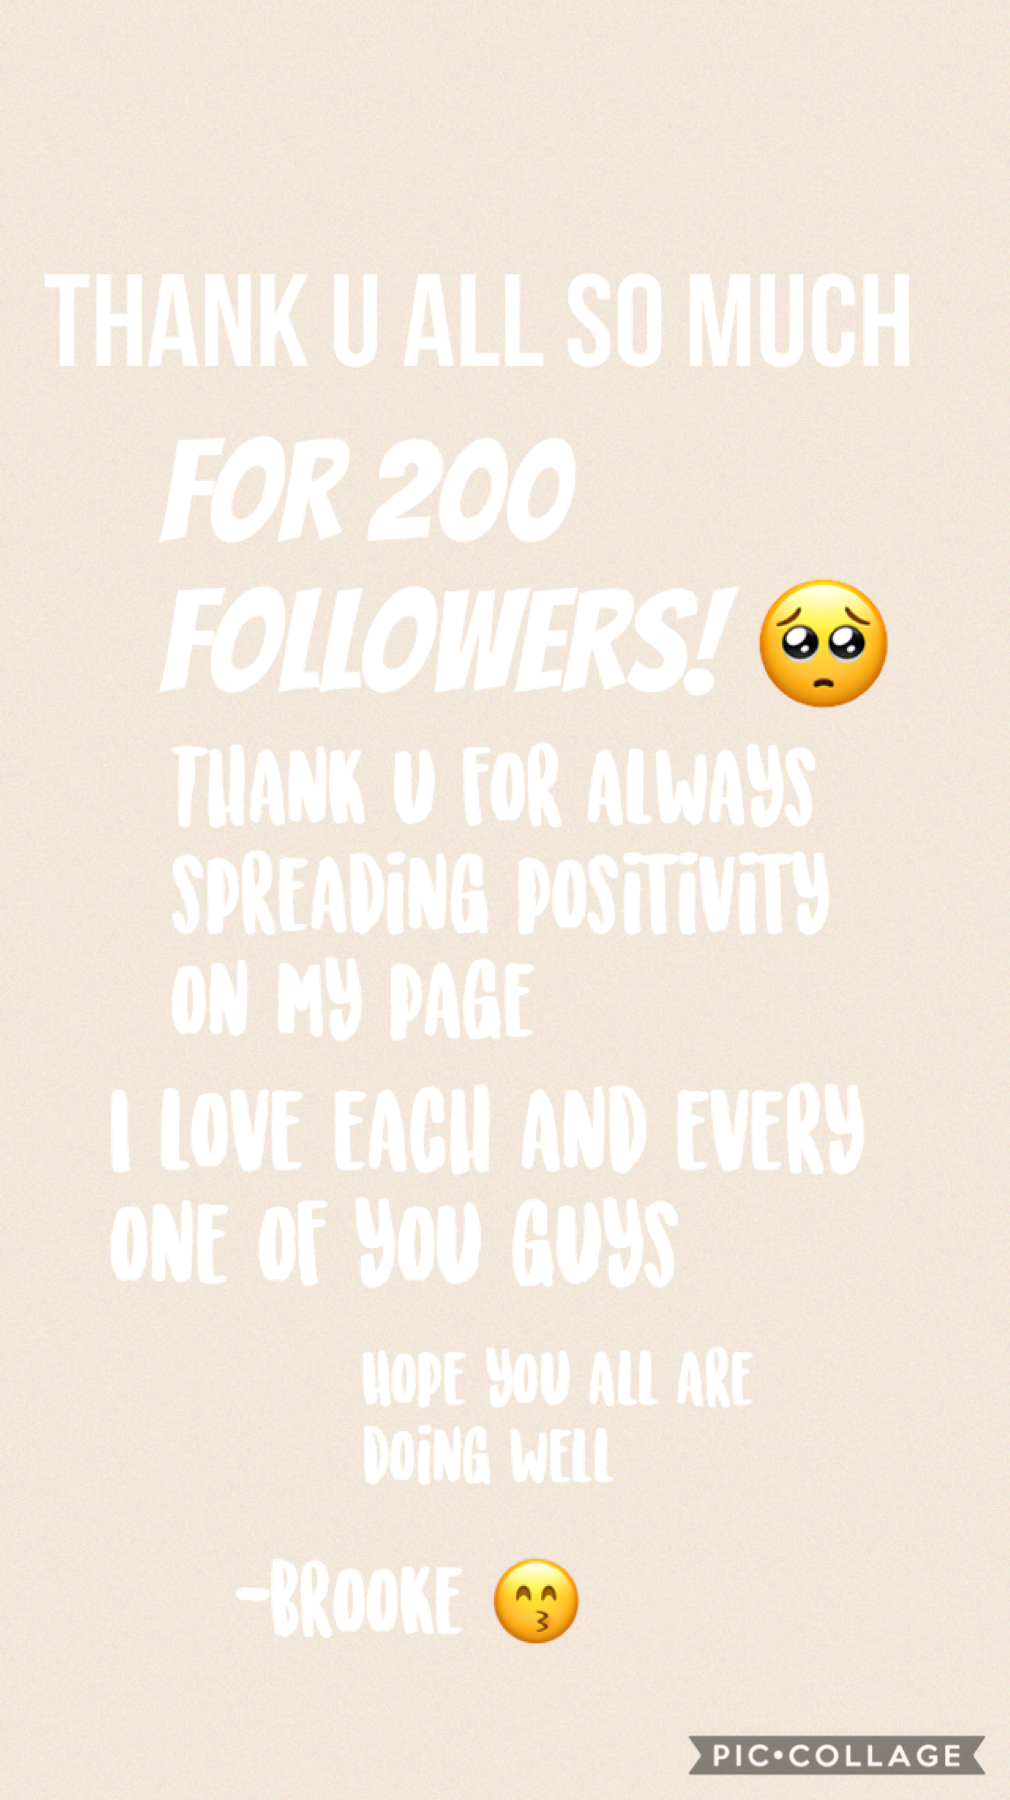 sorry guys this got taken down for some reason so I’m reposting it but thanks again for 200 !!
